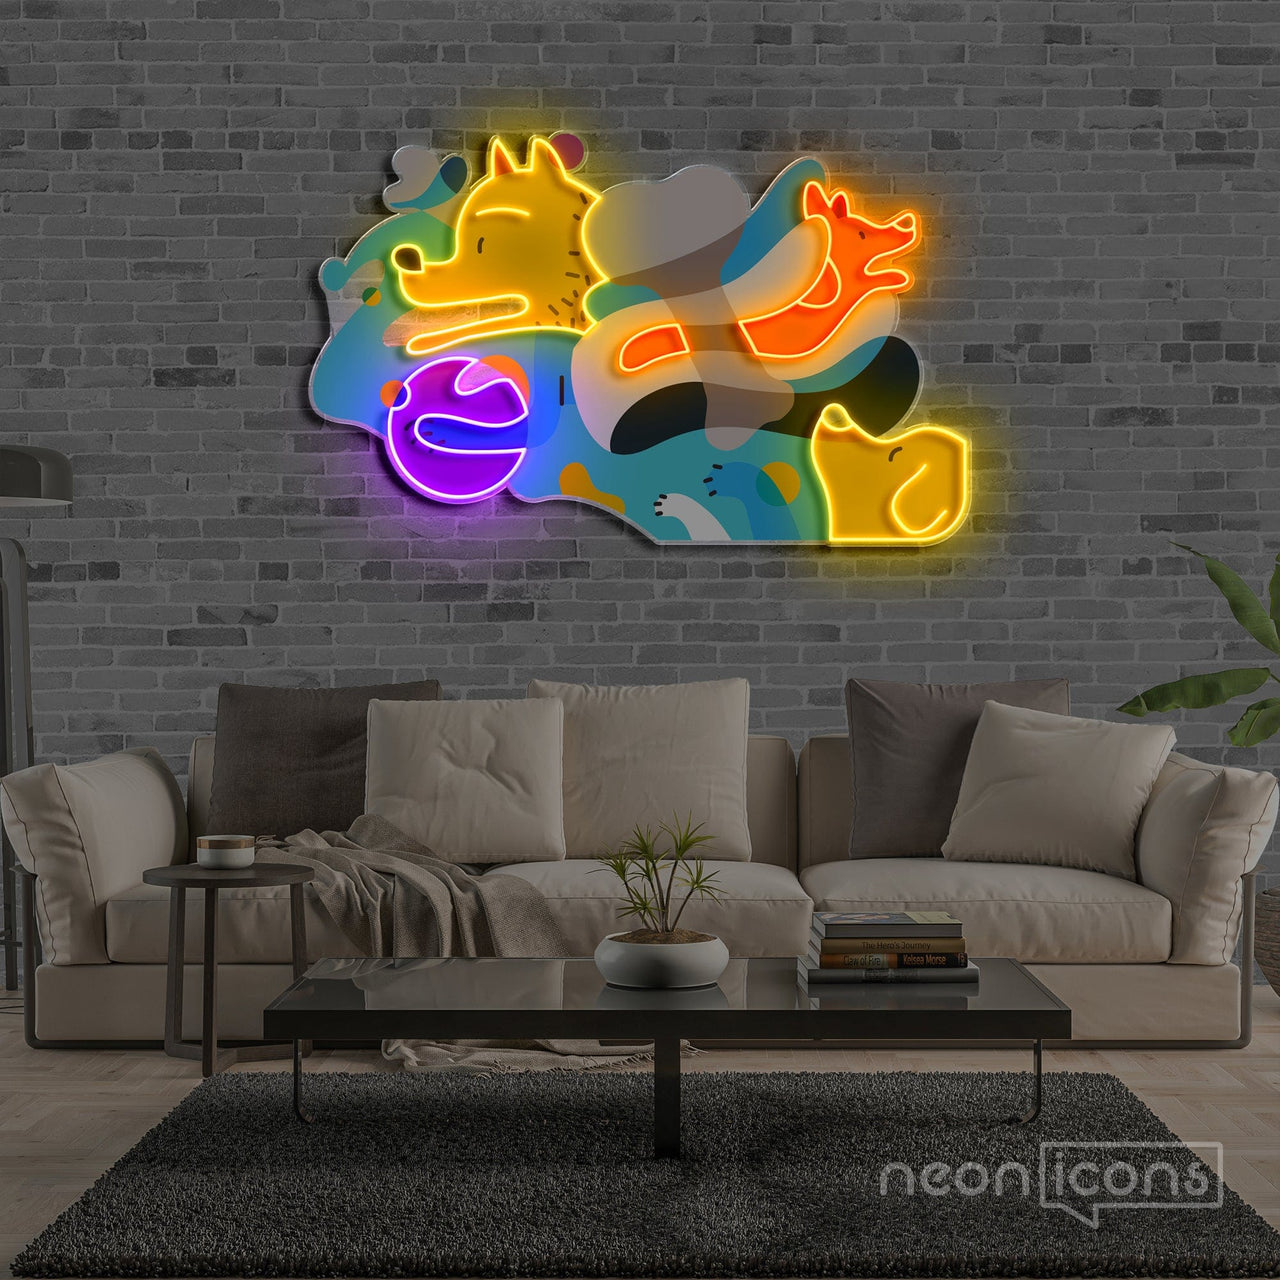 "Picasso Puppies" Neon x Acrylic Artwork by Neon Icons